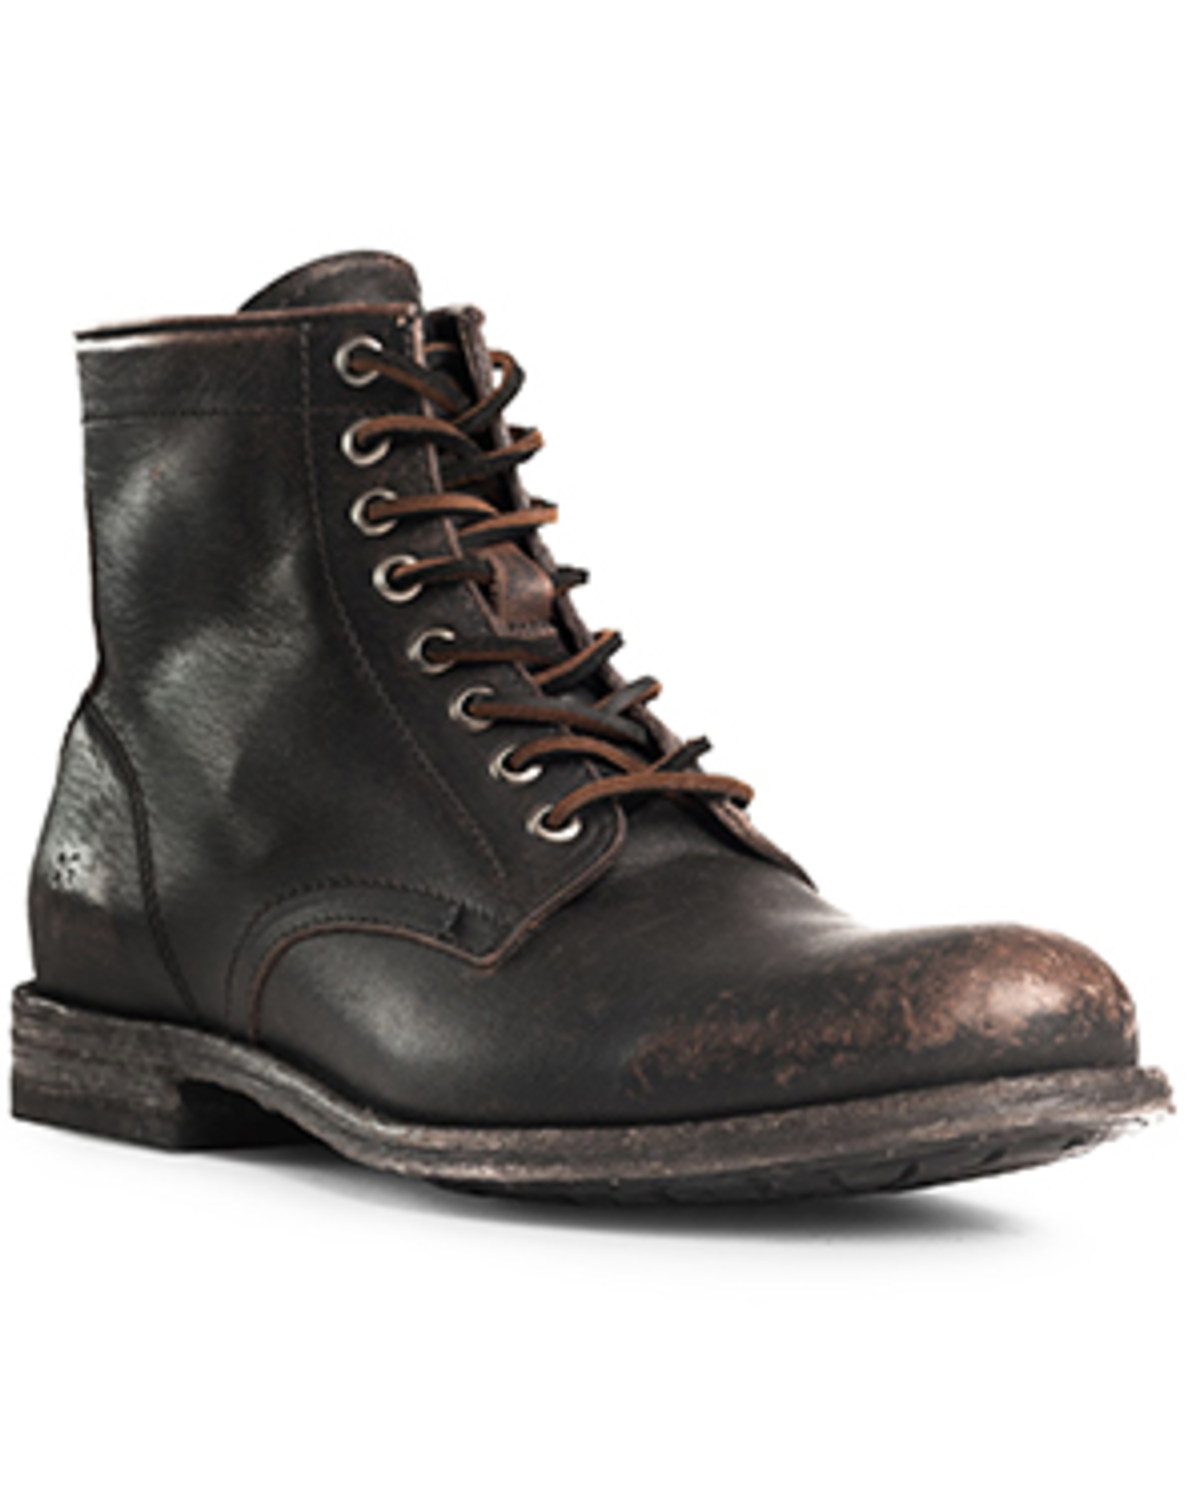 Frye Men's Tyler Lace-Up Boots - Round Toe